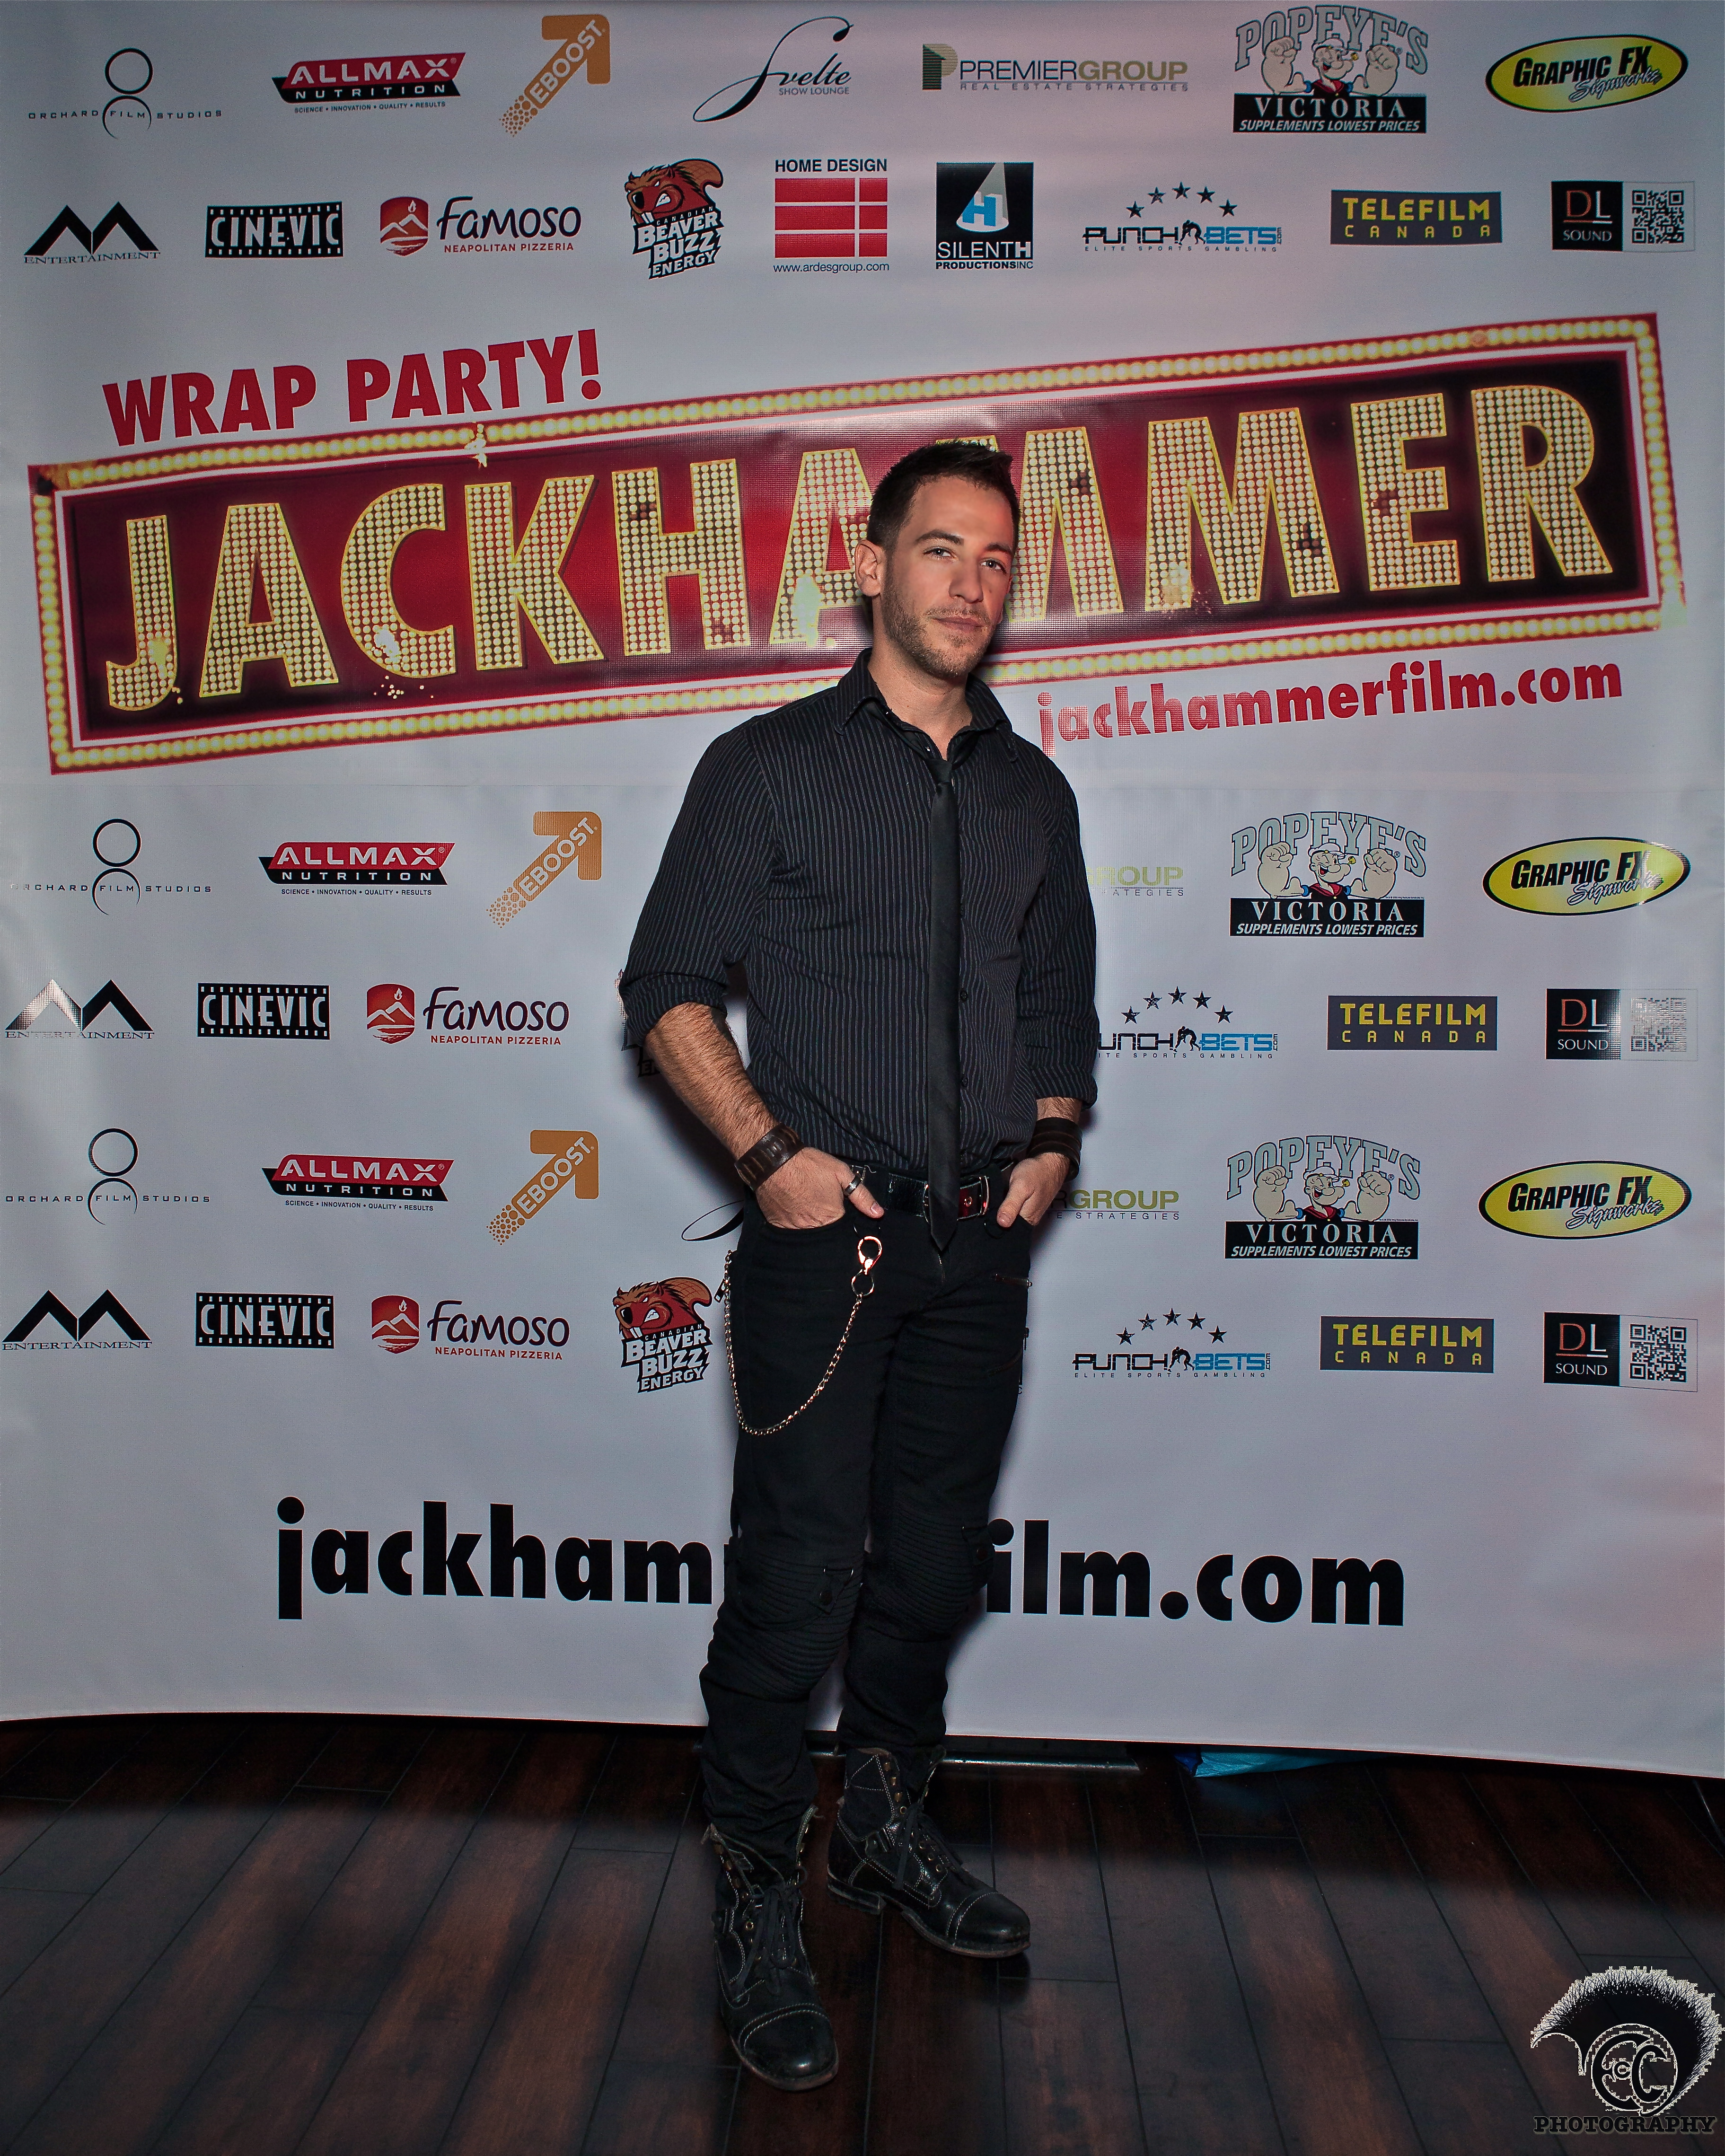 Mark Adam Zeifman showing support for fellow film makers and actors at the screening and wrap party of Jackhammer